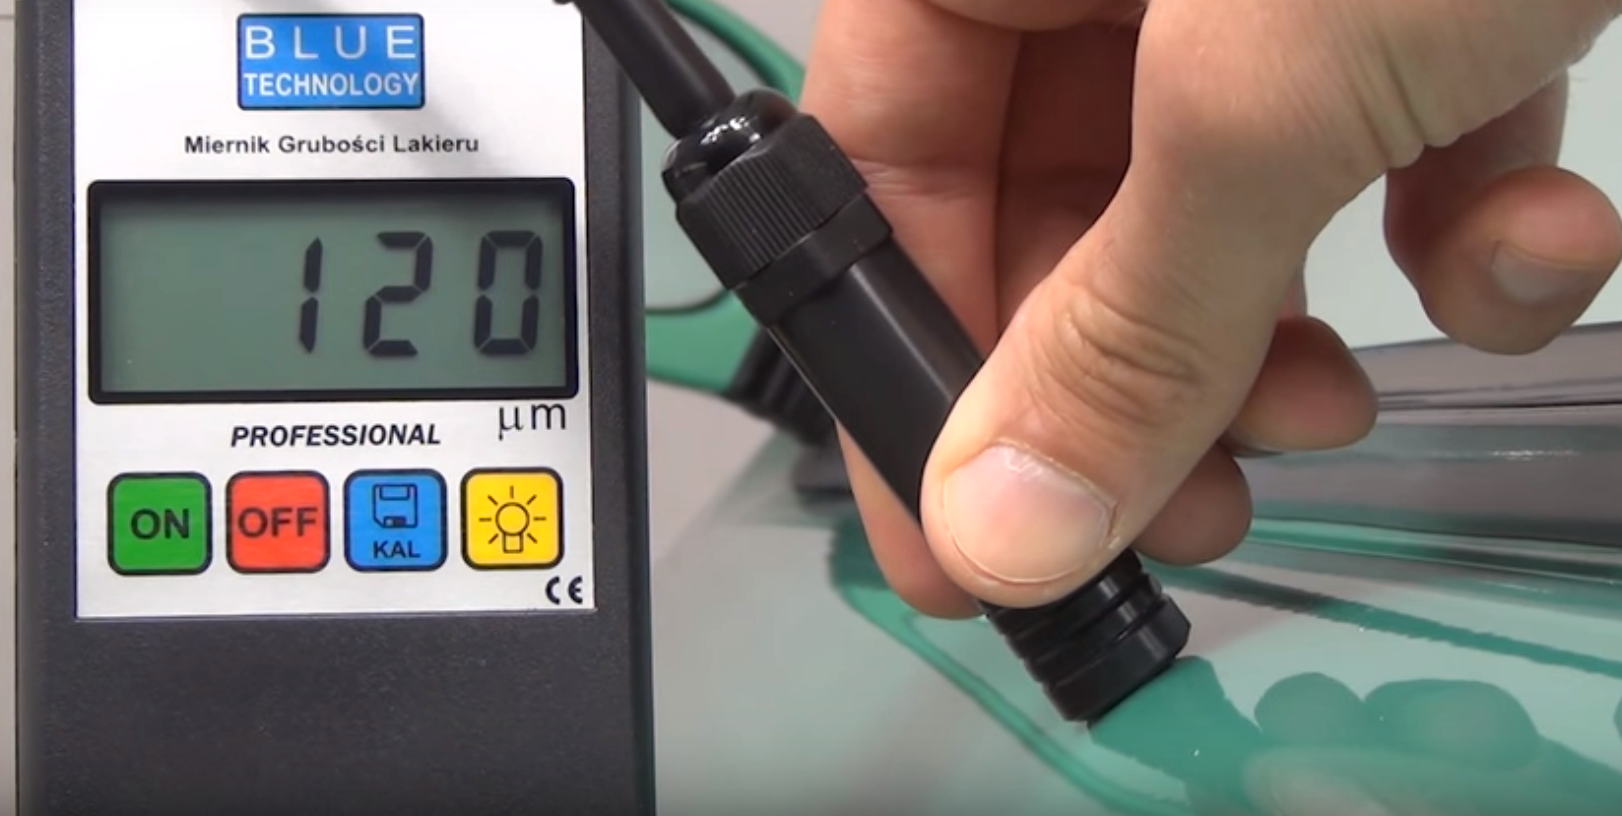 Paint Coating Thickness Gauge for Cars P-13-AL FE/AL Professional Made in EU